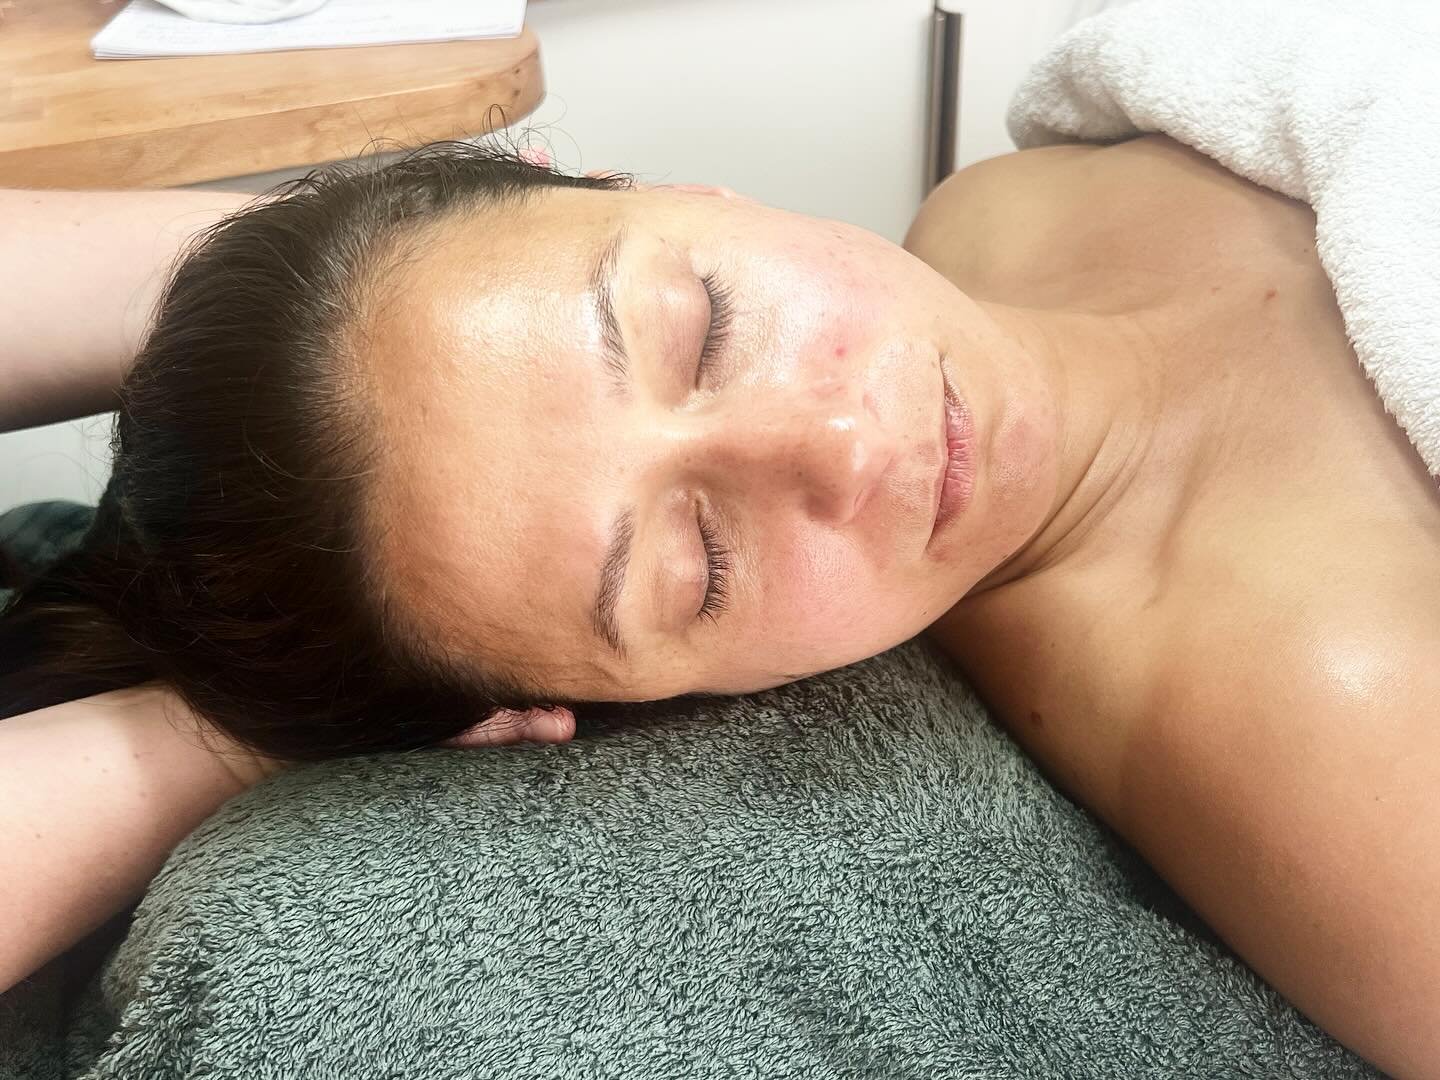 Who wants to feel this relaxed? 

Having a facial is not just rejuvenating to the face, but it is also restorative for the mind. Regular facials give you the time to focus on your breathing, regain your confidence in having healthy beautiful skin, an